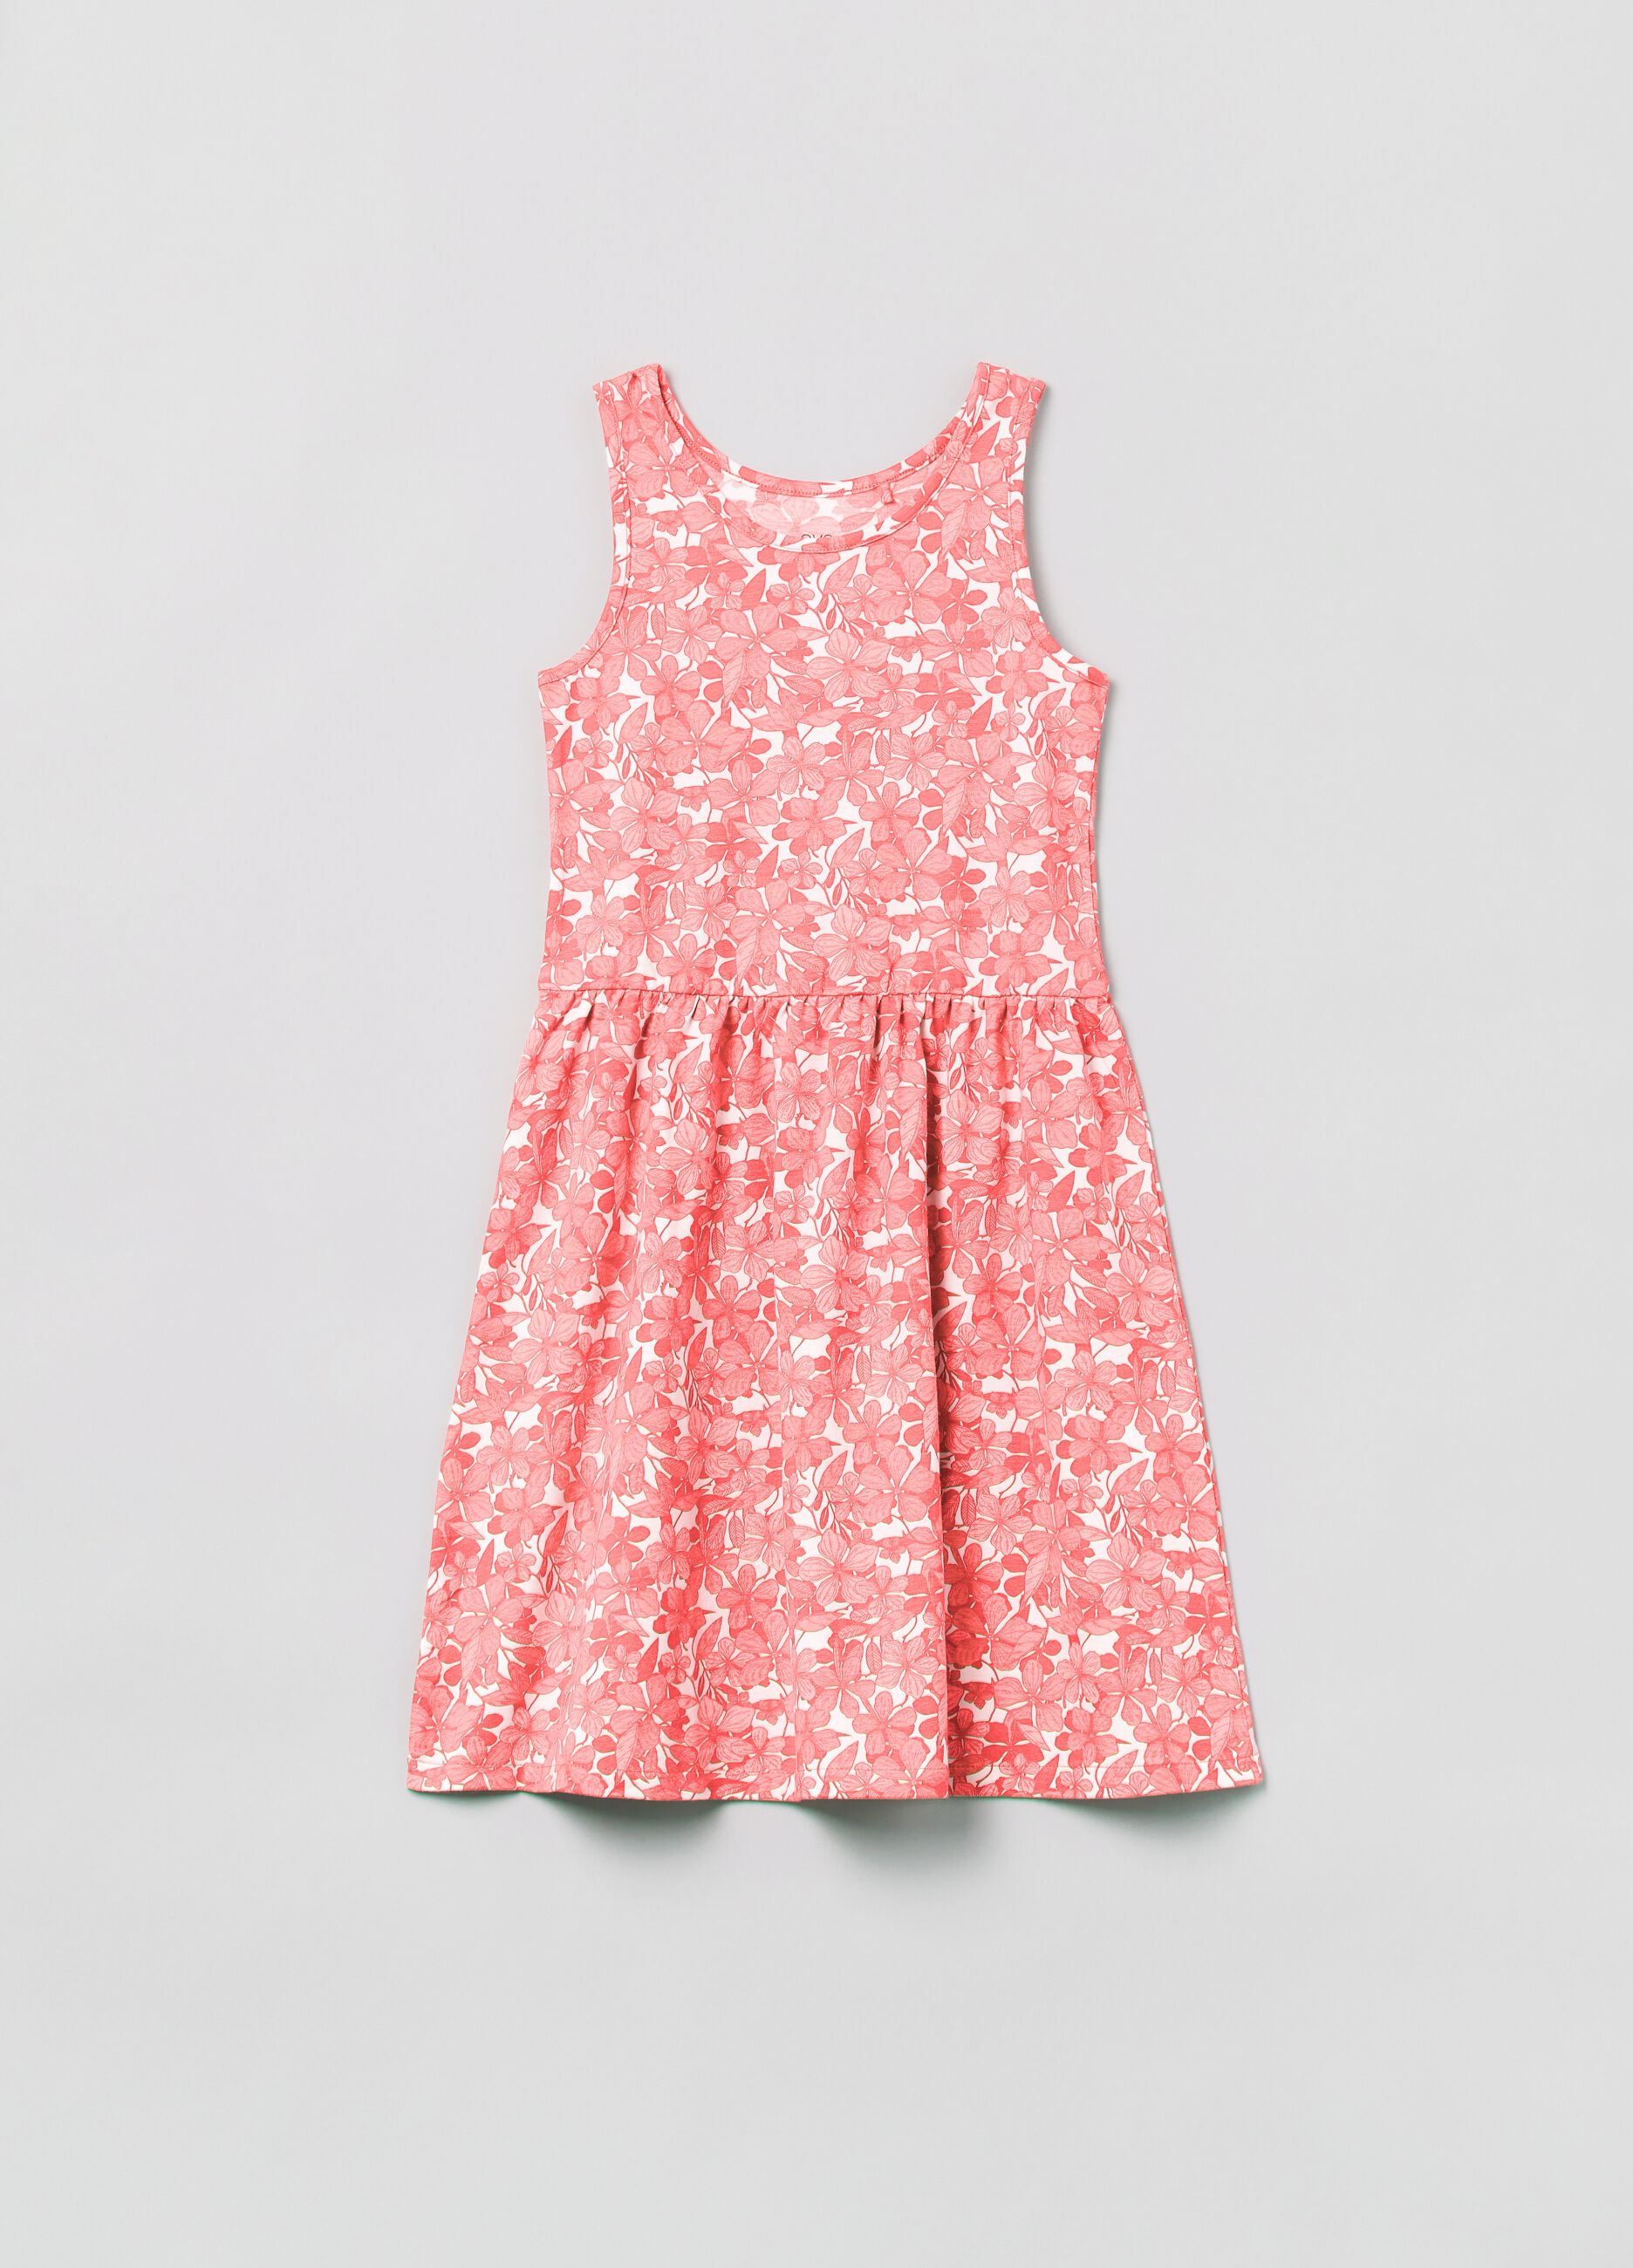 Sleeveless dress with floral pattern.